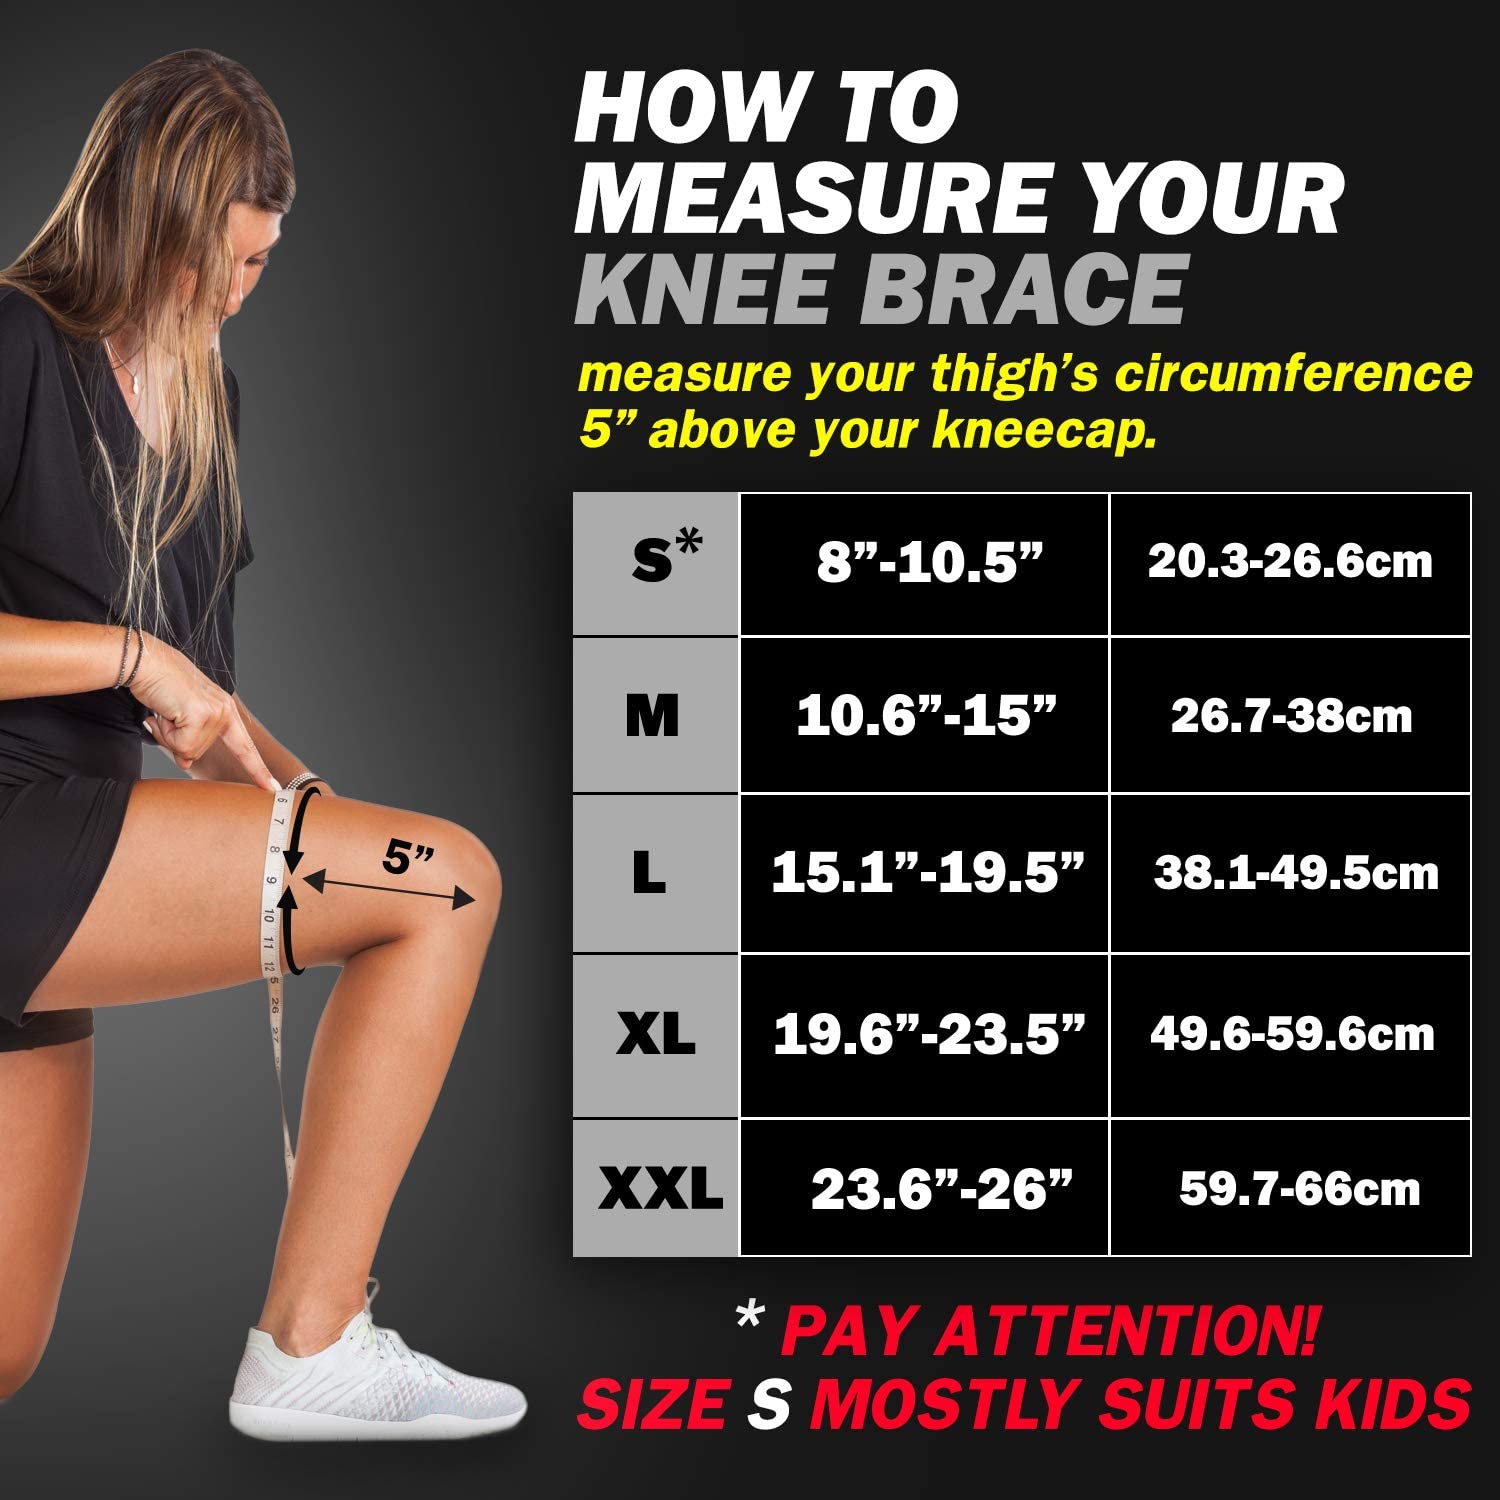 How to measure your knee brace